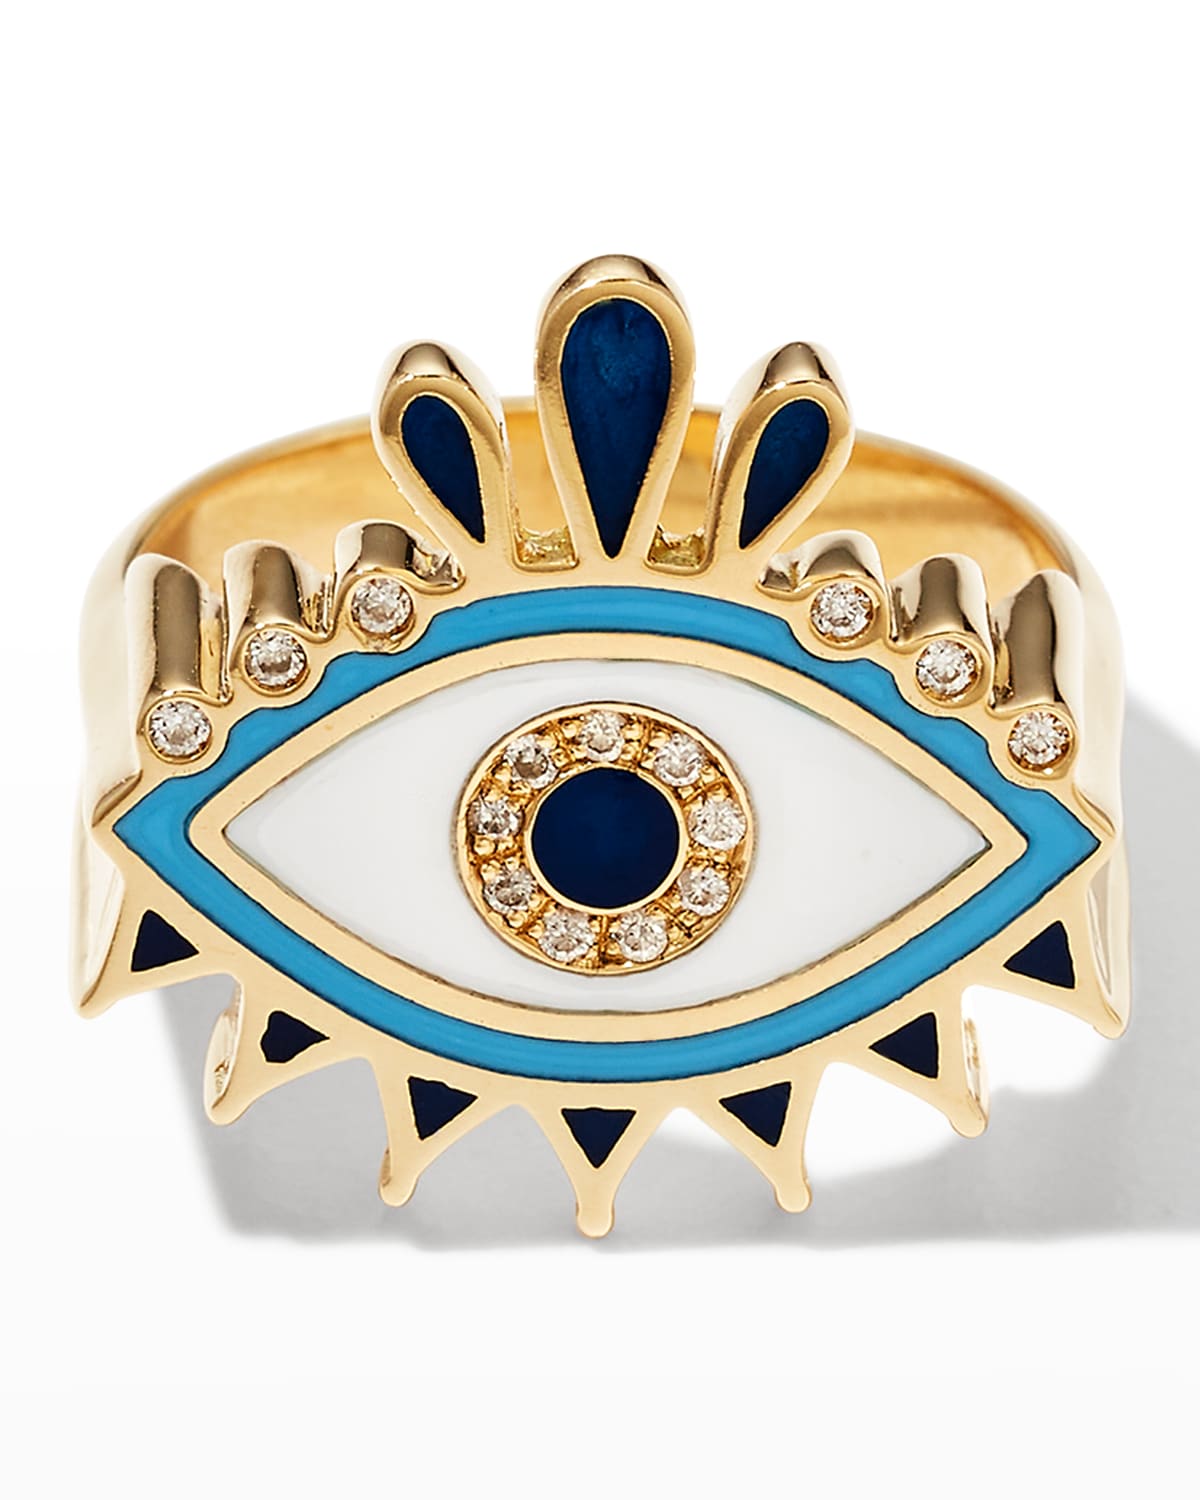 L'ATELIER NAWBAR QUEEN EYE PINKY RING WITH COLORED ENAMEL